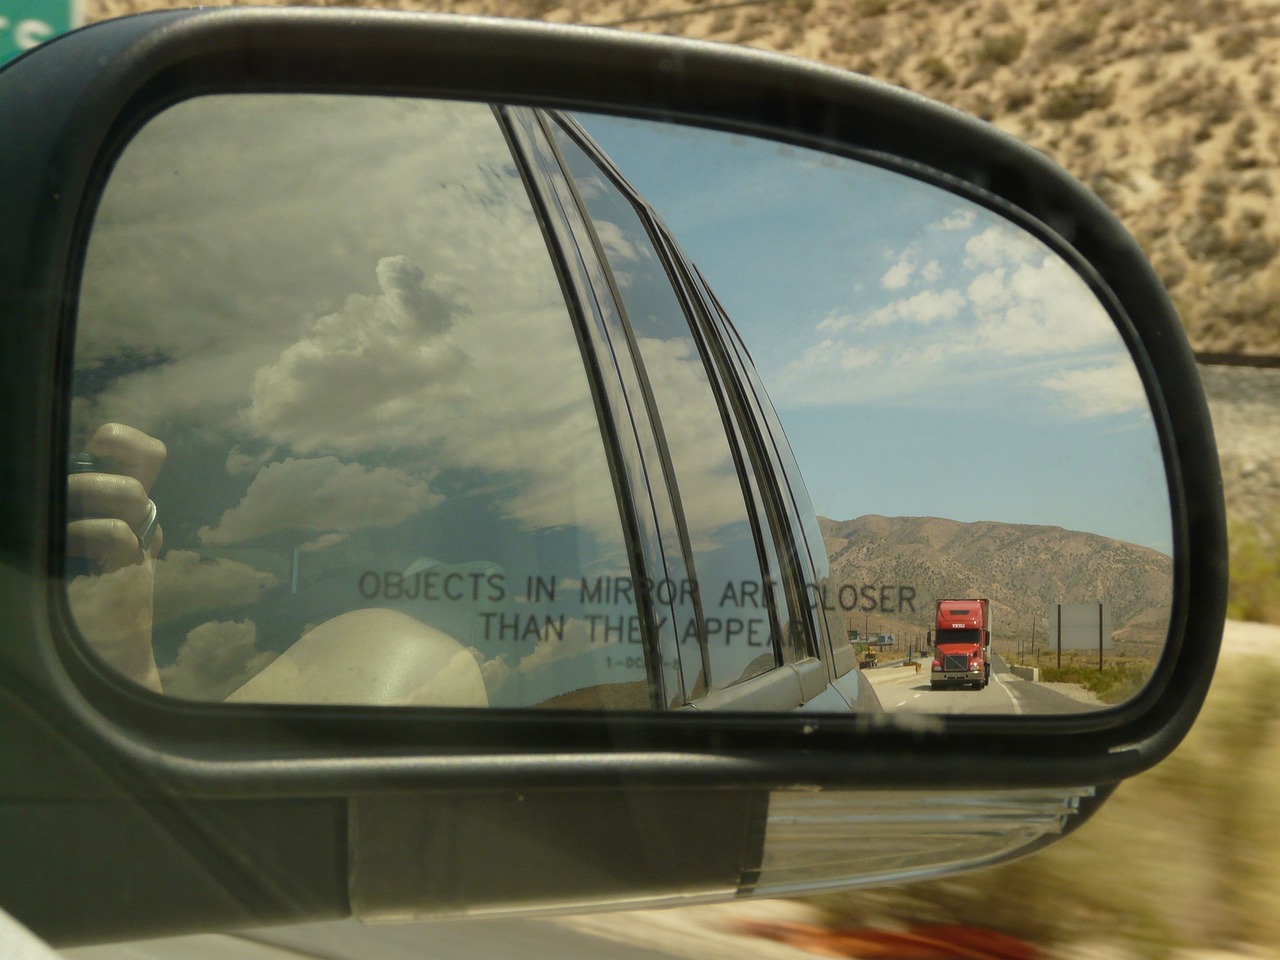 Rearview Mirror showing "objects are closer"